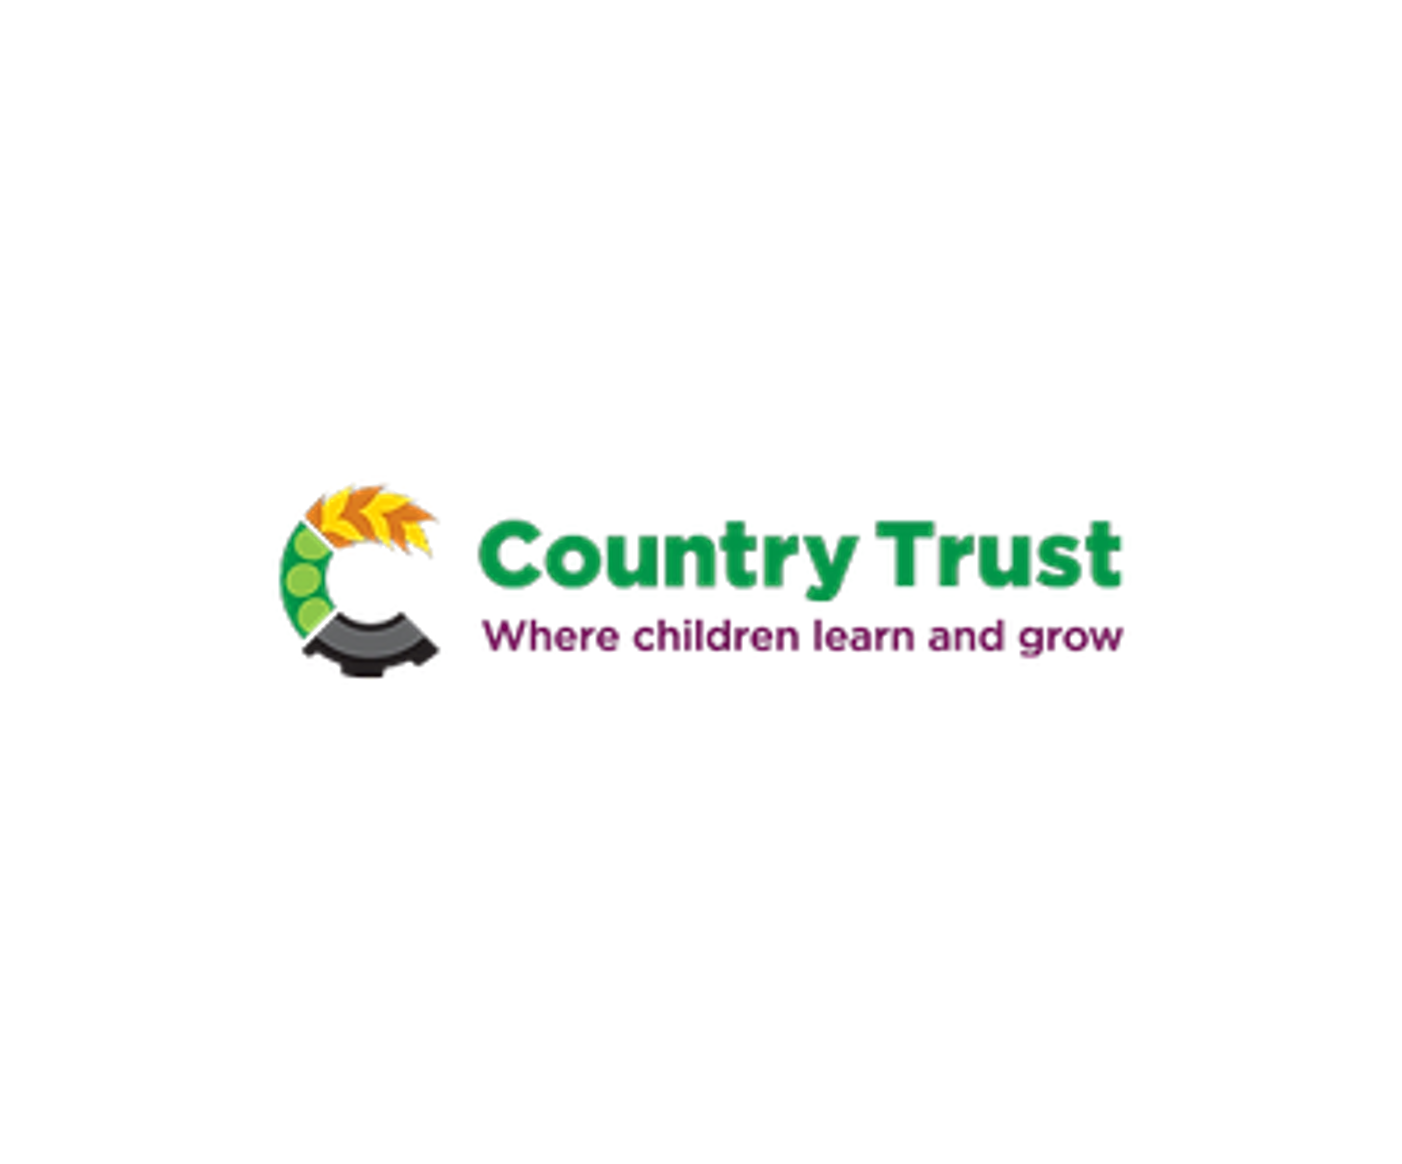 The Country Trust logo